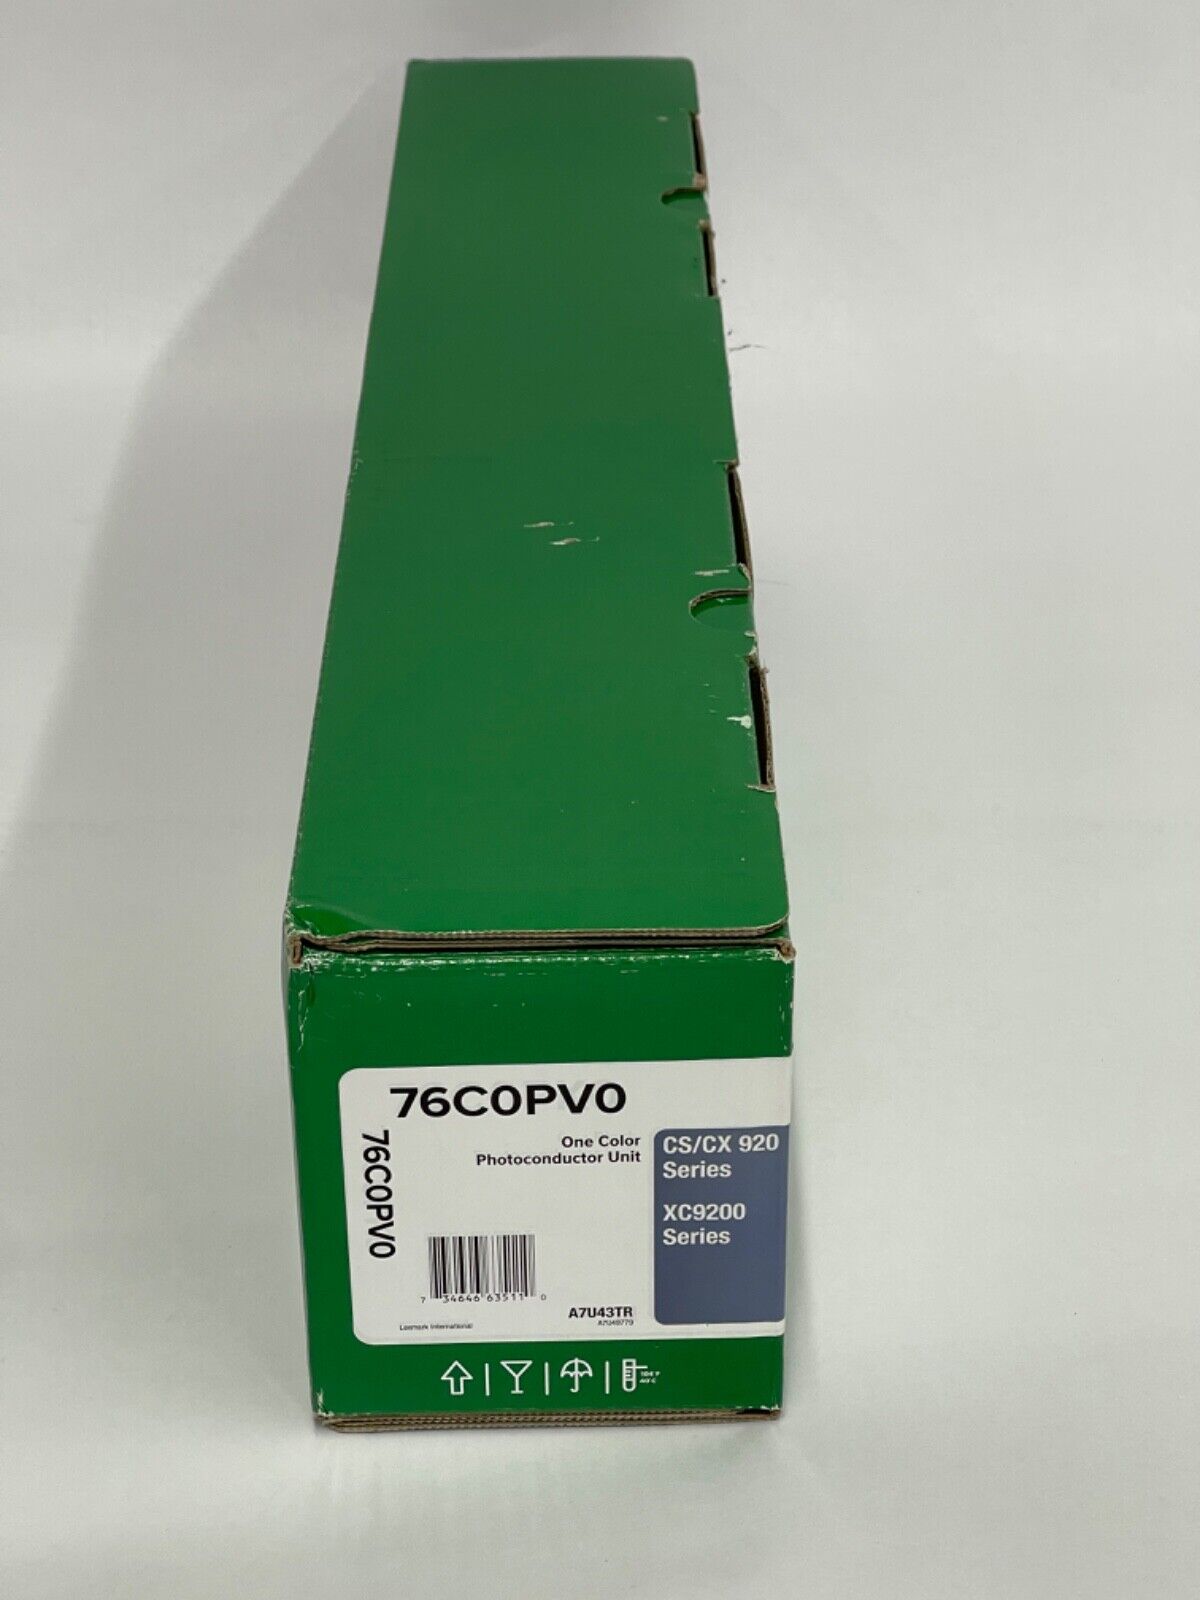 Lexmark 76C0PV0 One Color Photoconductor Unit  For CS/CX920 - XC 9200 Series